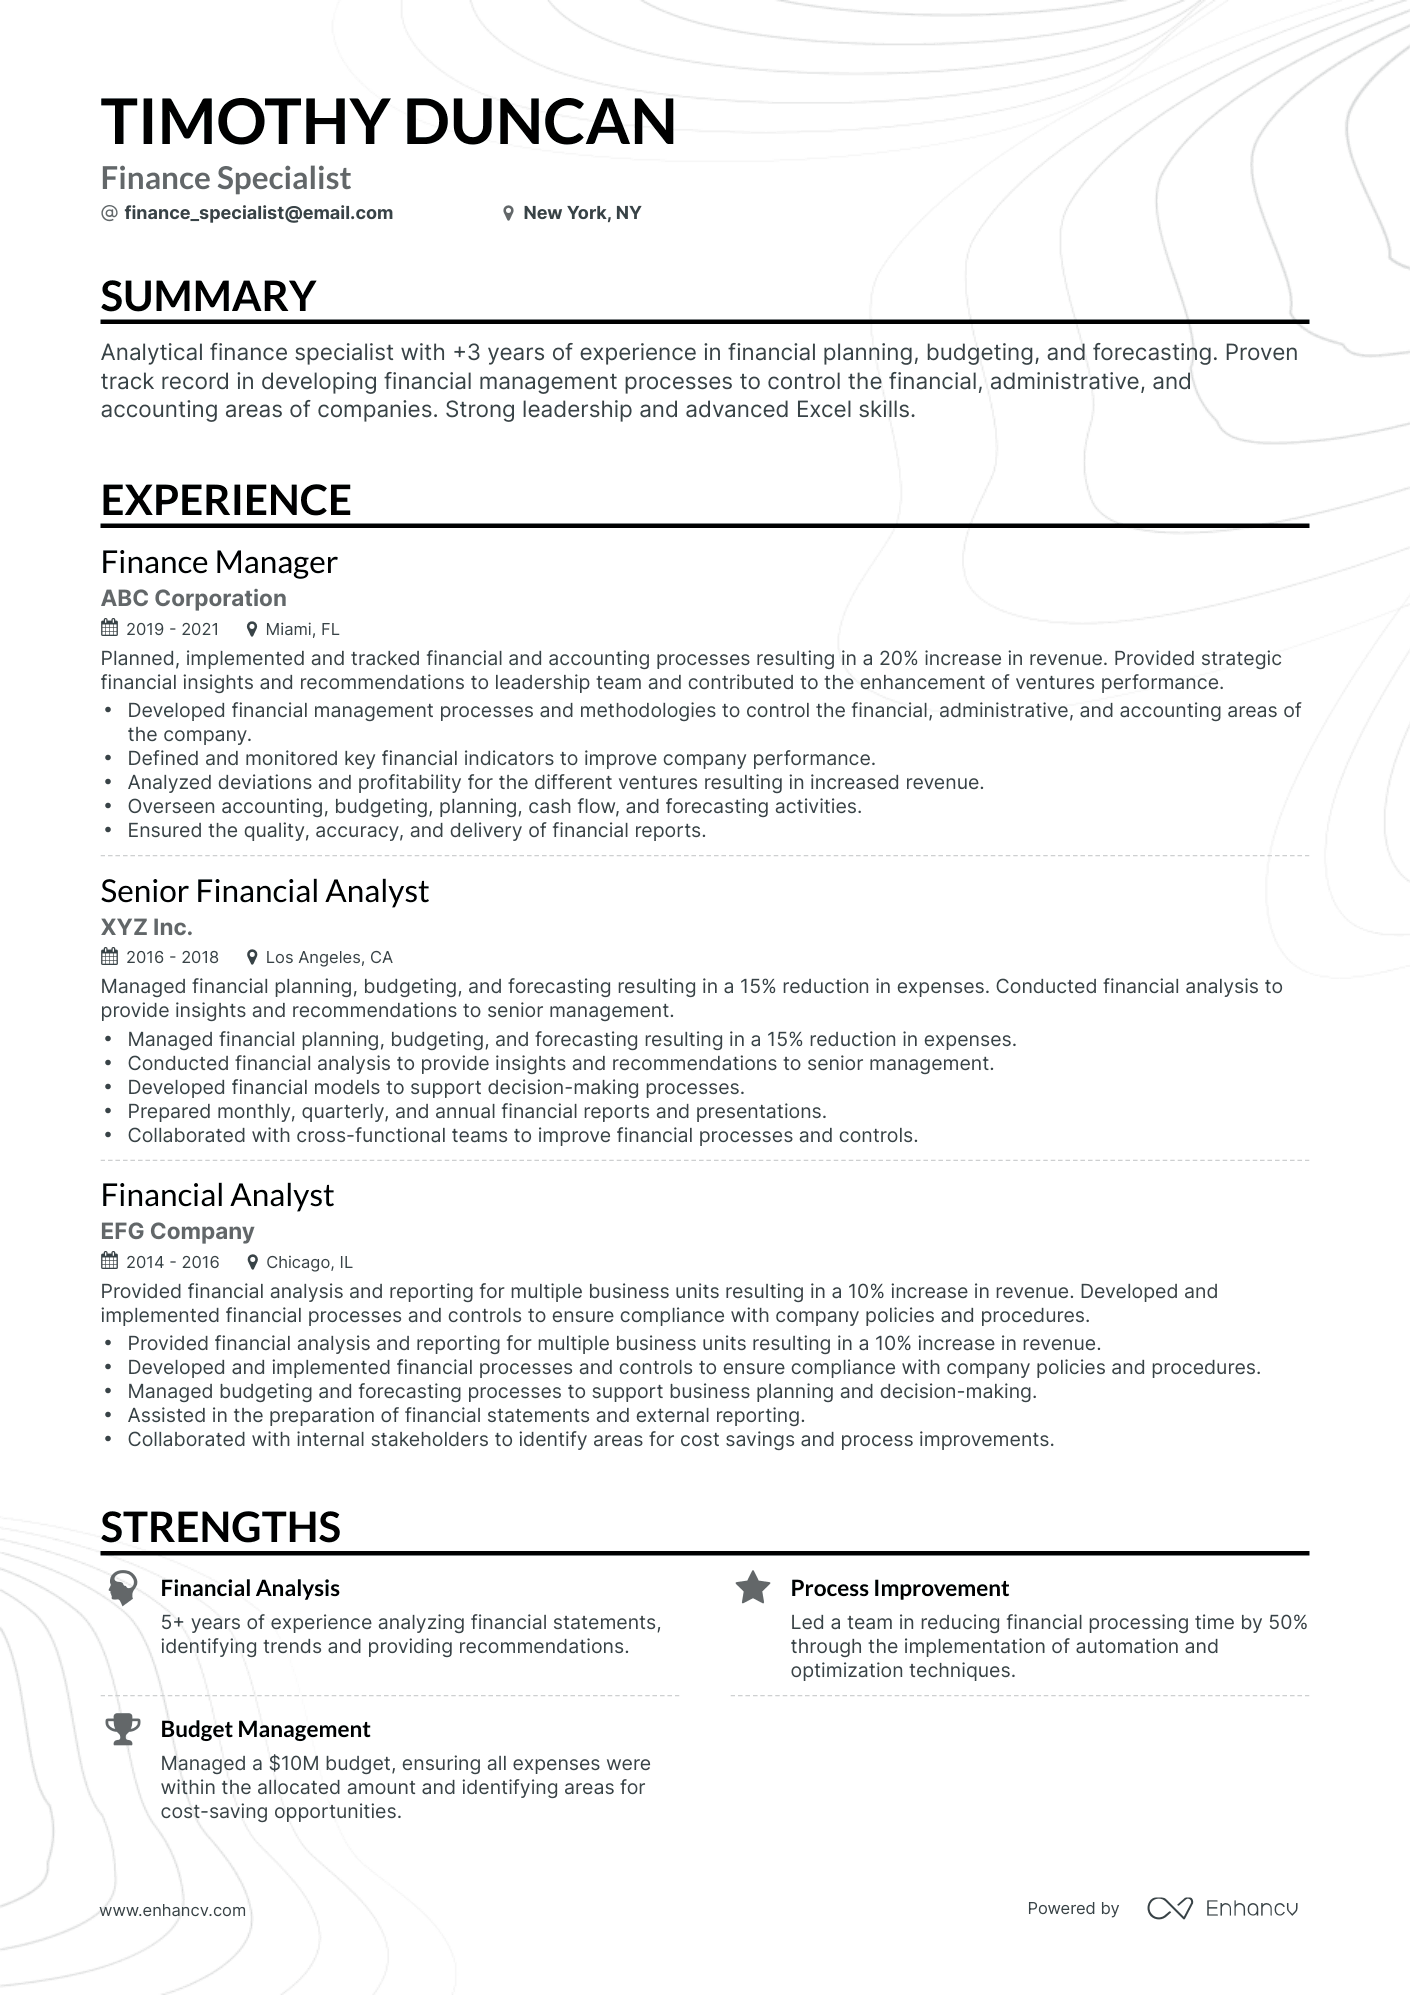 Classic Finance Specialist Resume Template